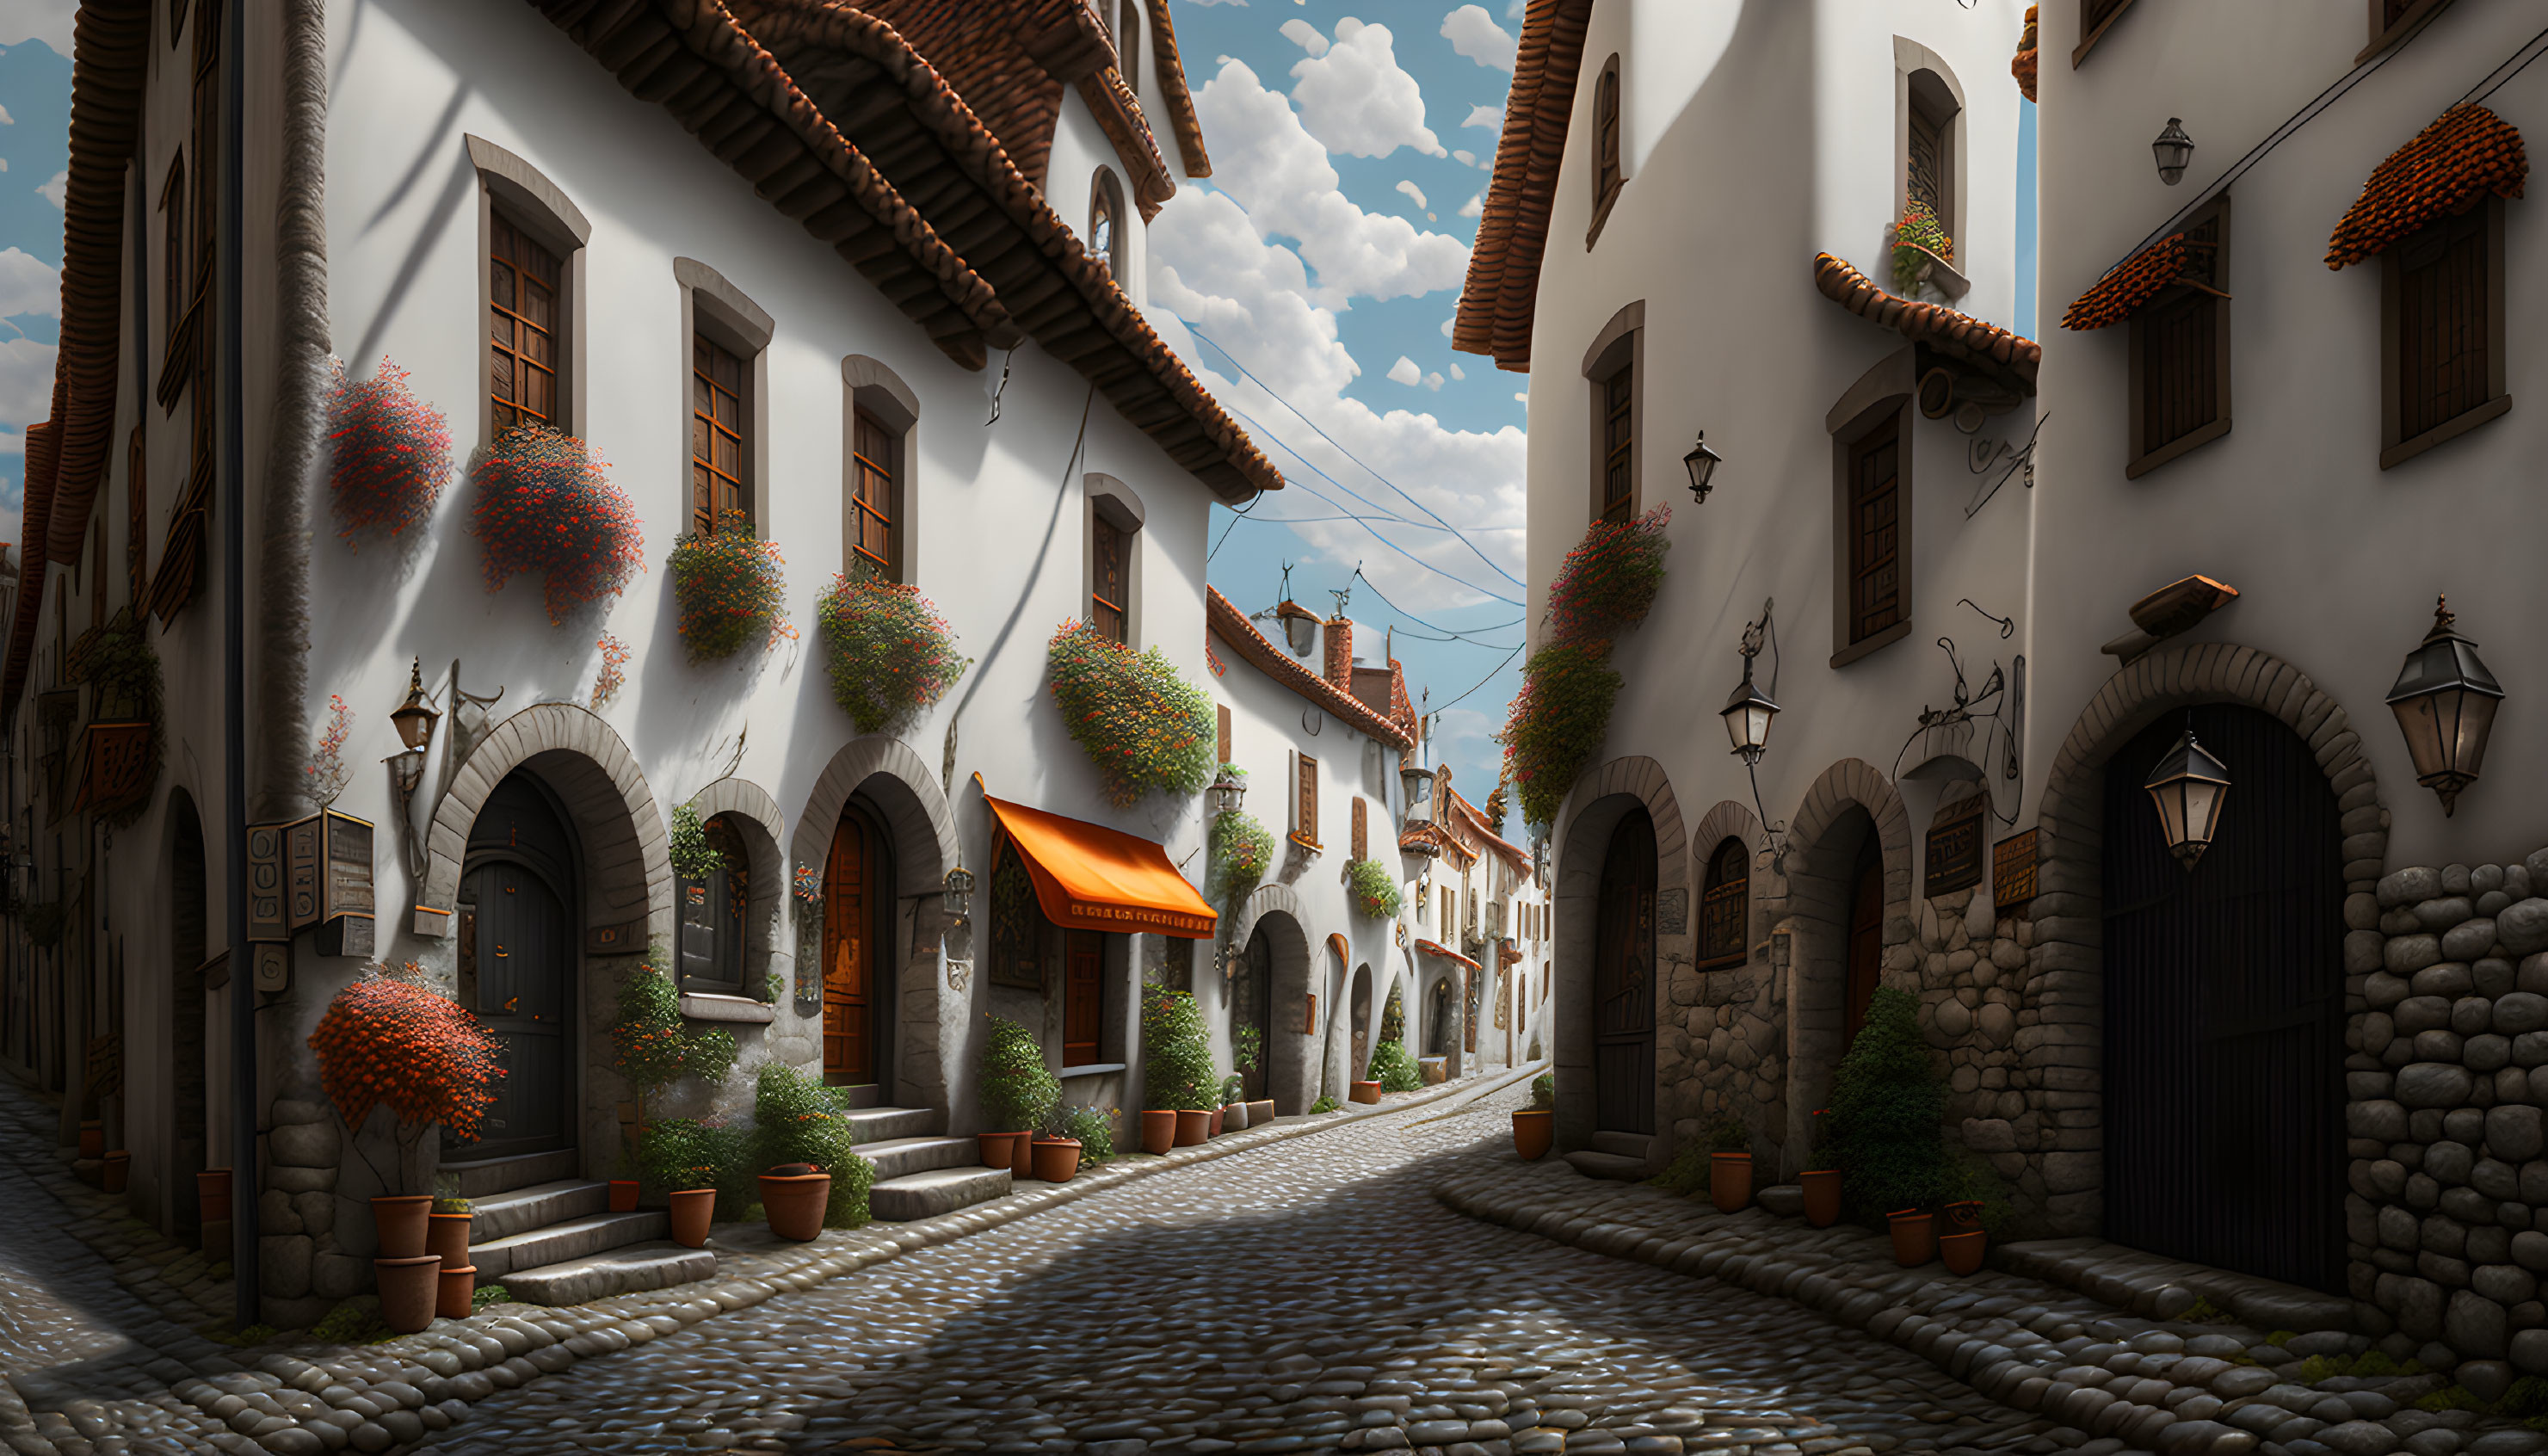 Quaint Old Town: Cobblestone Street & White Houses with Flowers